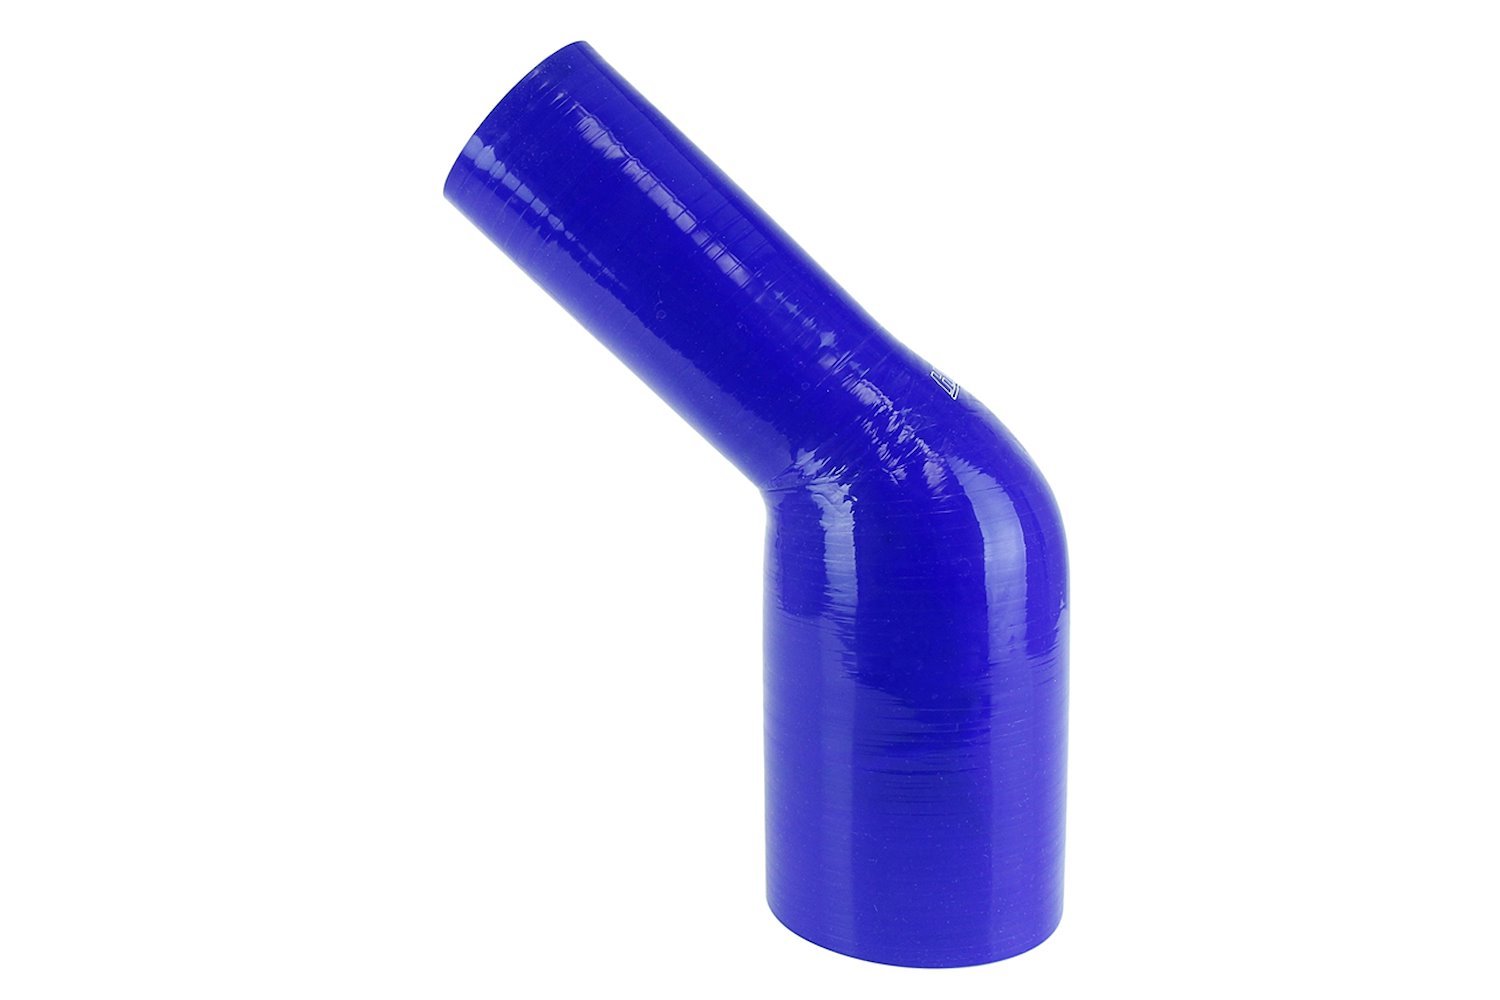 HTSER45-225-275-BLUE Silicone 45-Degree Elbow Hose, High-Temp 4-Ply Reinforced, 2-1/4 in. - 2-3/4 in. ID, Blue